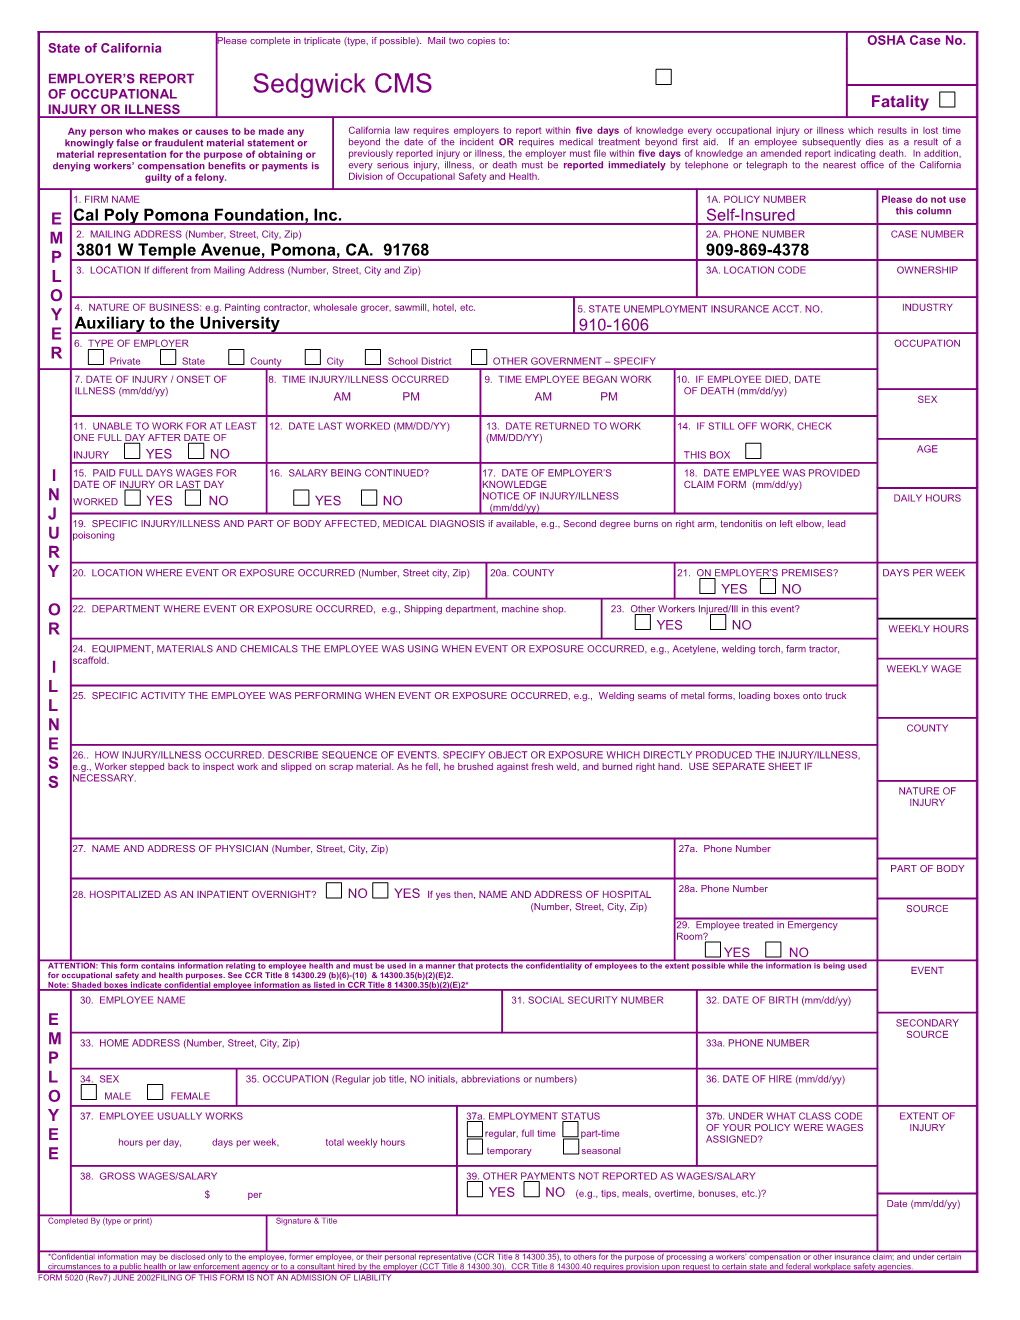 FORM 5020 (Rev7) JUNE 2002FILING of THIS FORM IS NOT an ADMISSION of LIABILITY